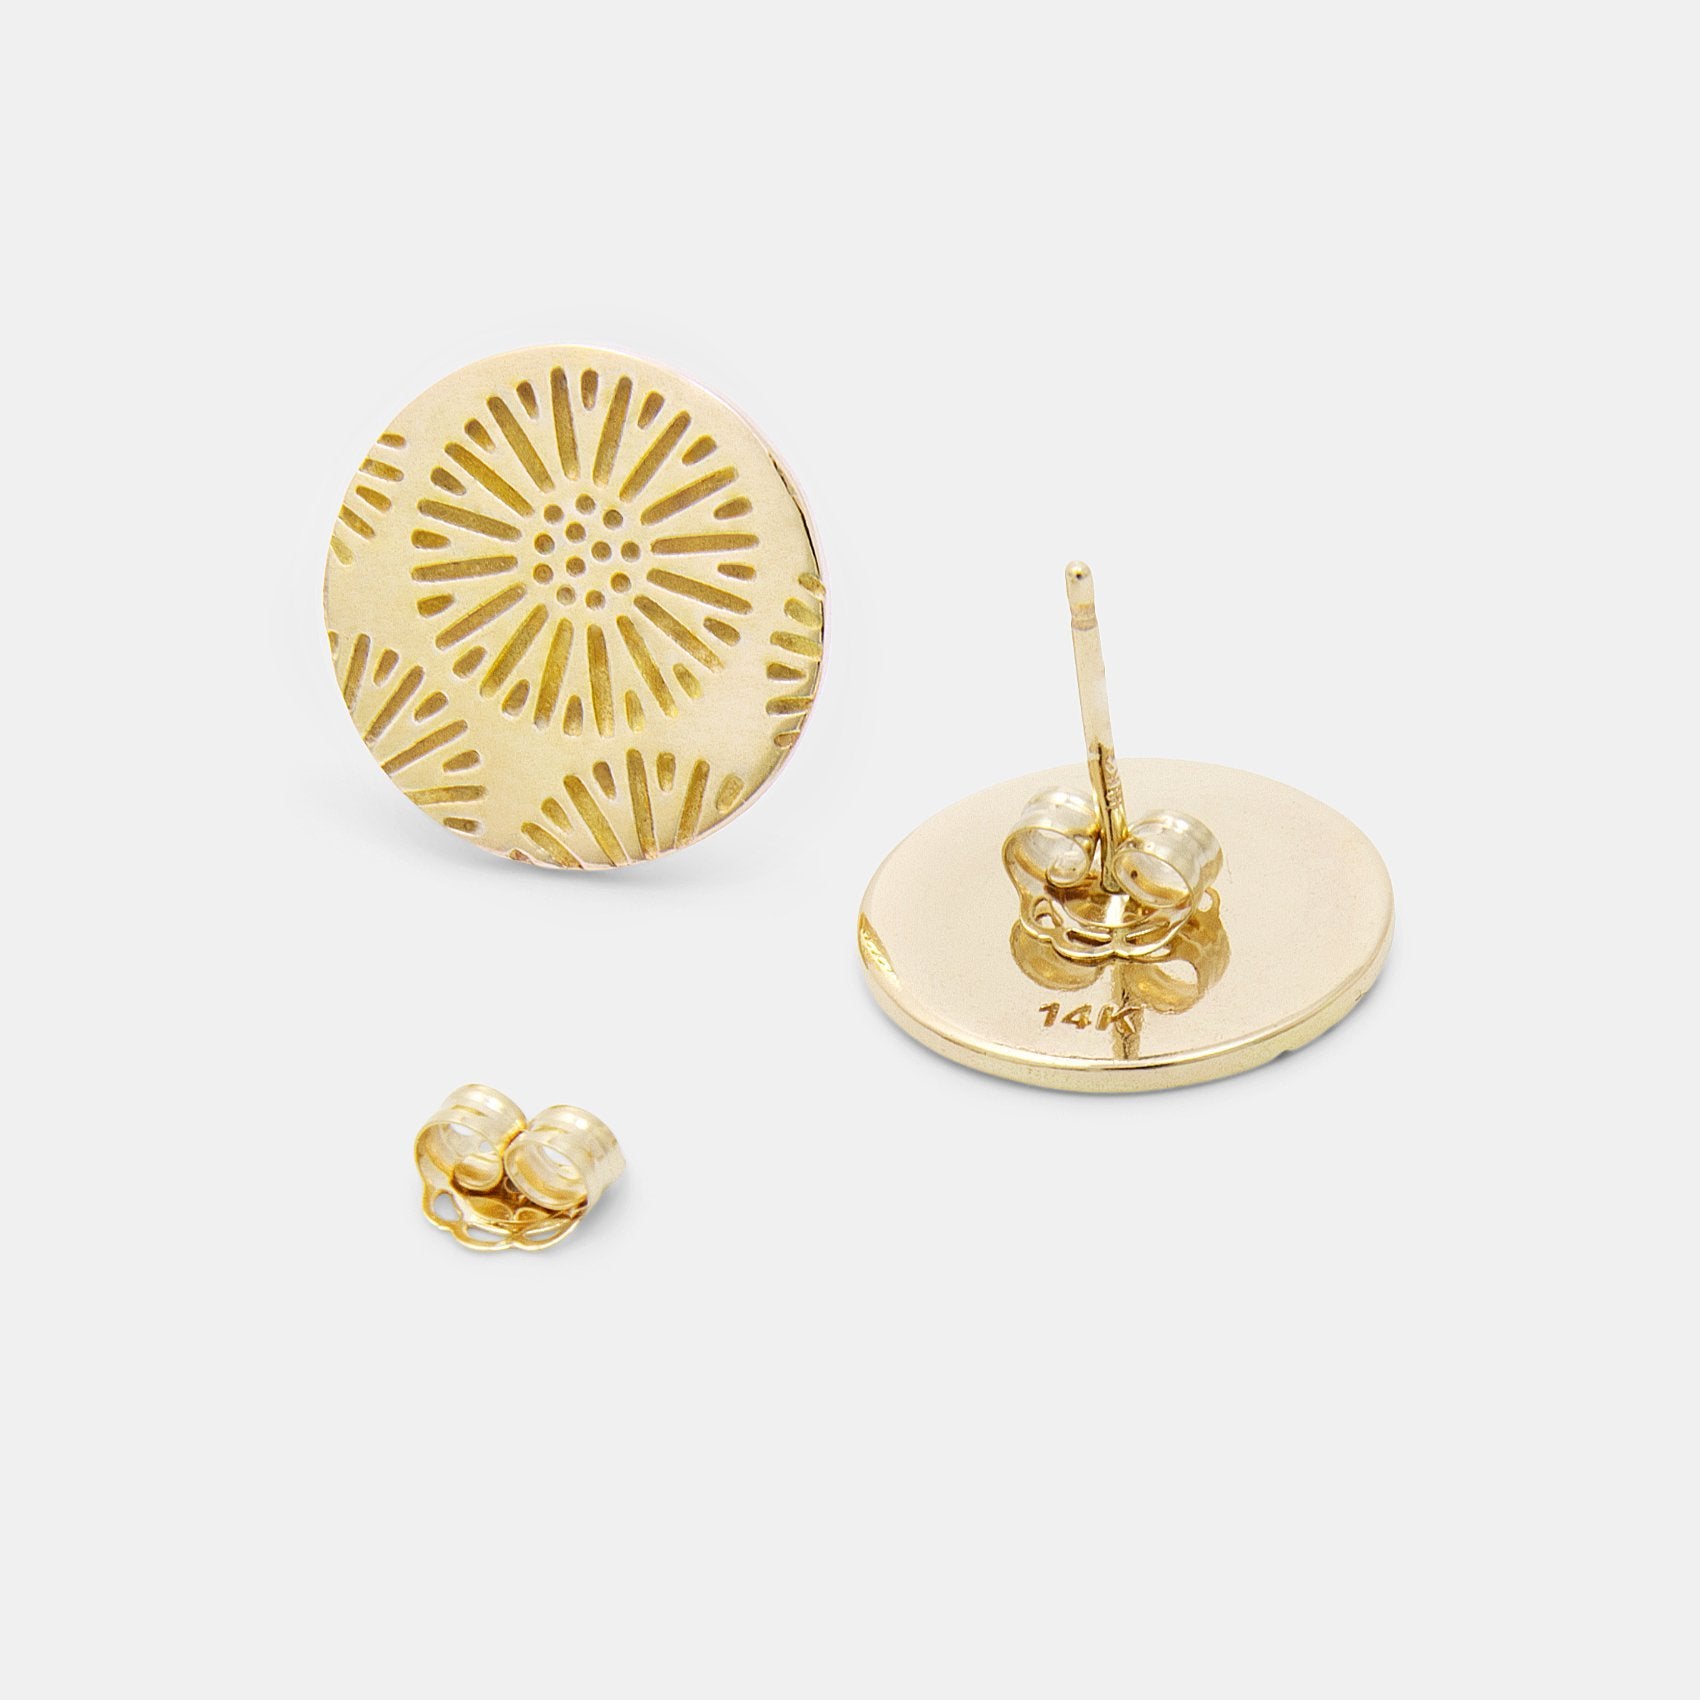 Coral texture solid gold stud earrings - Simone Walsh Jewellery Australia